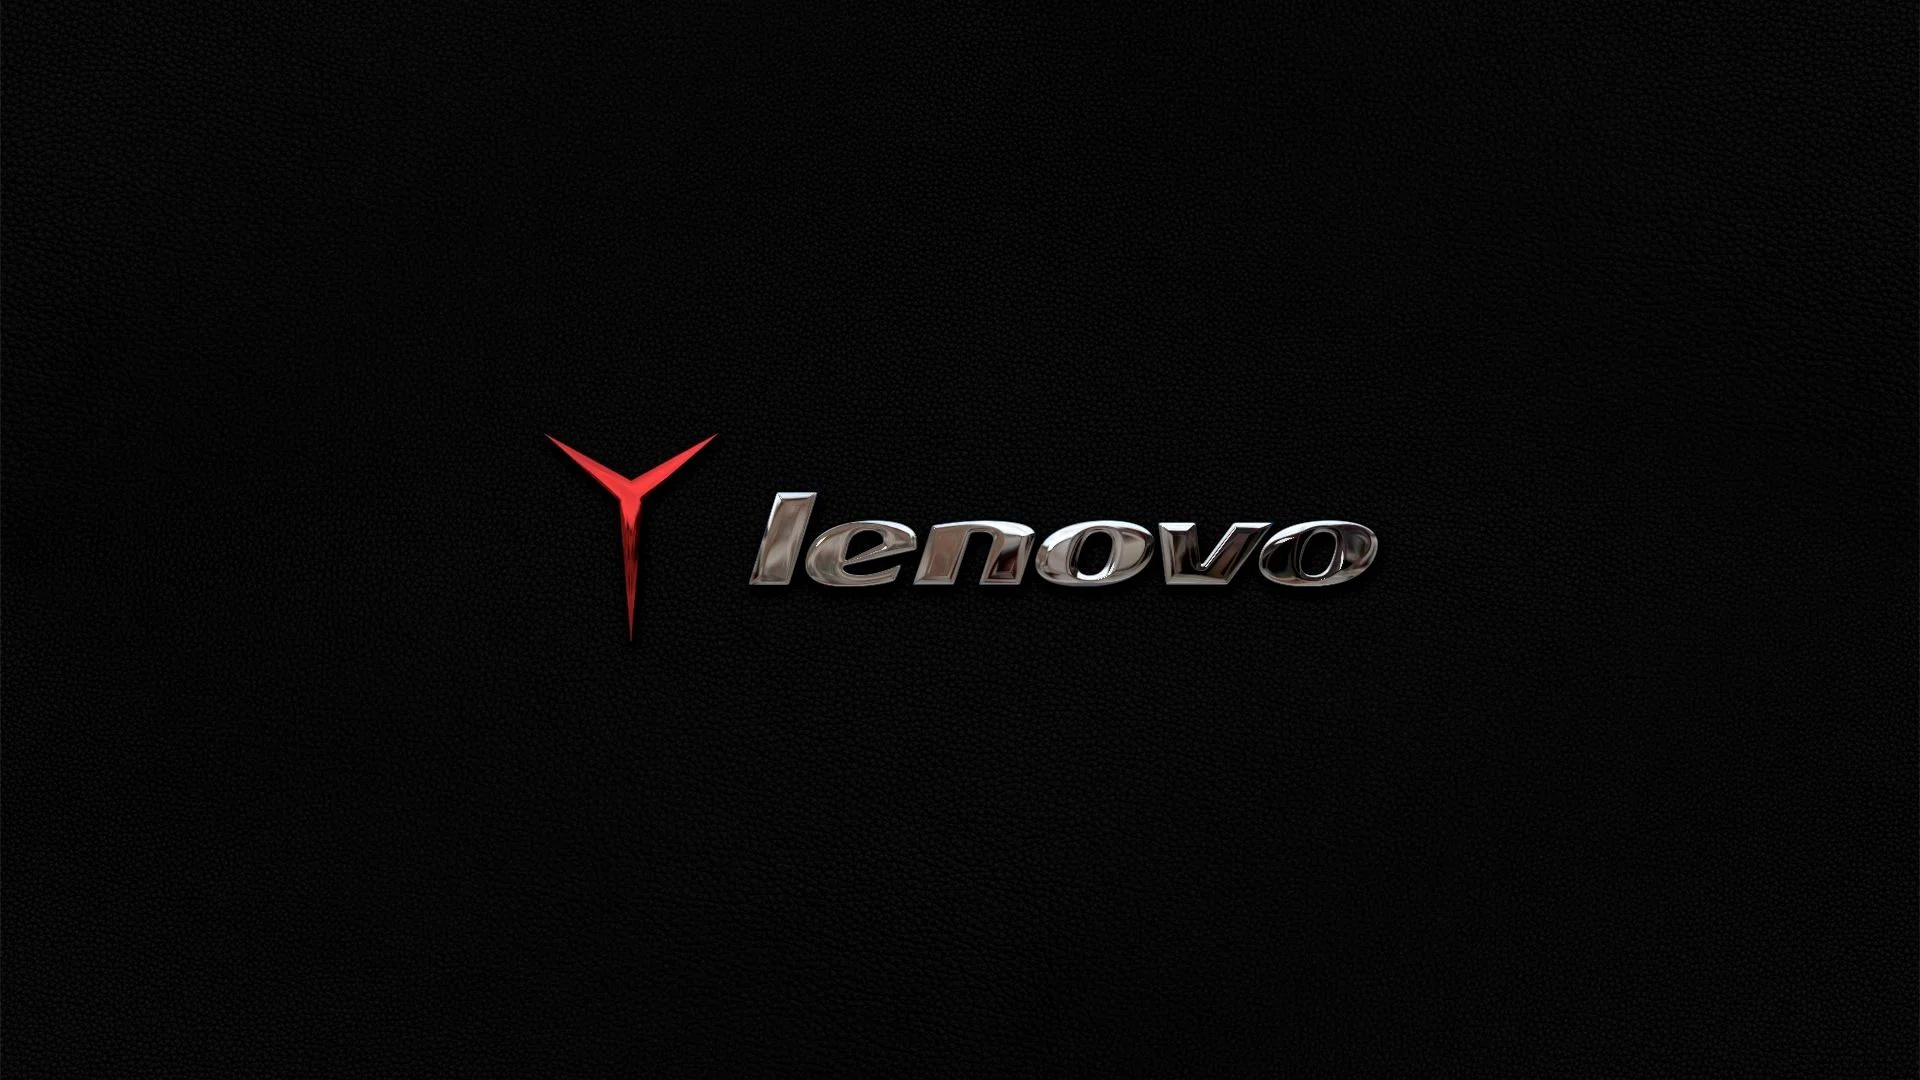 Lenovo ideapad gaming, High-performance gaming, Immersive gaming experience, Cutting-edge technology, 1920x1080 Full HD Desktop